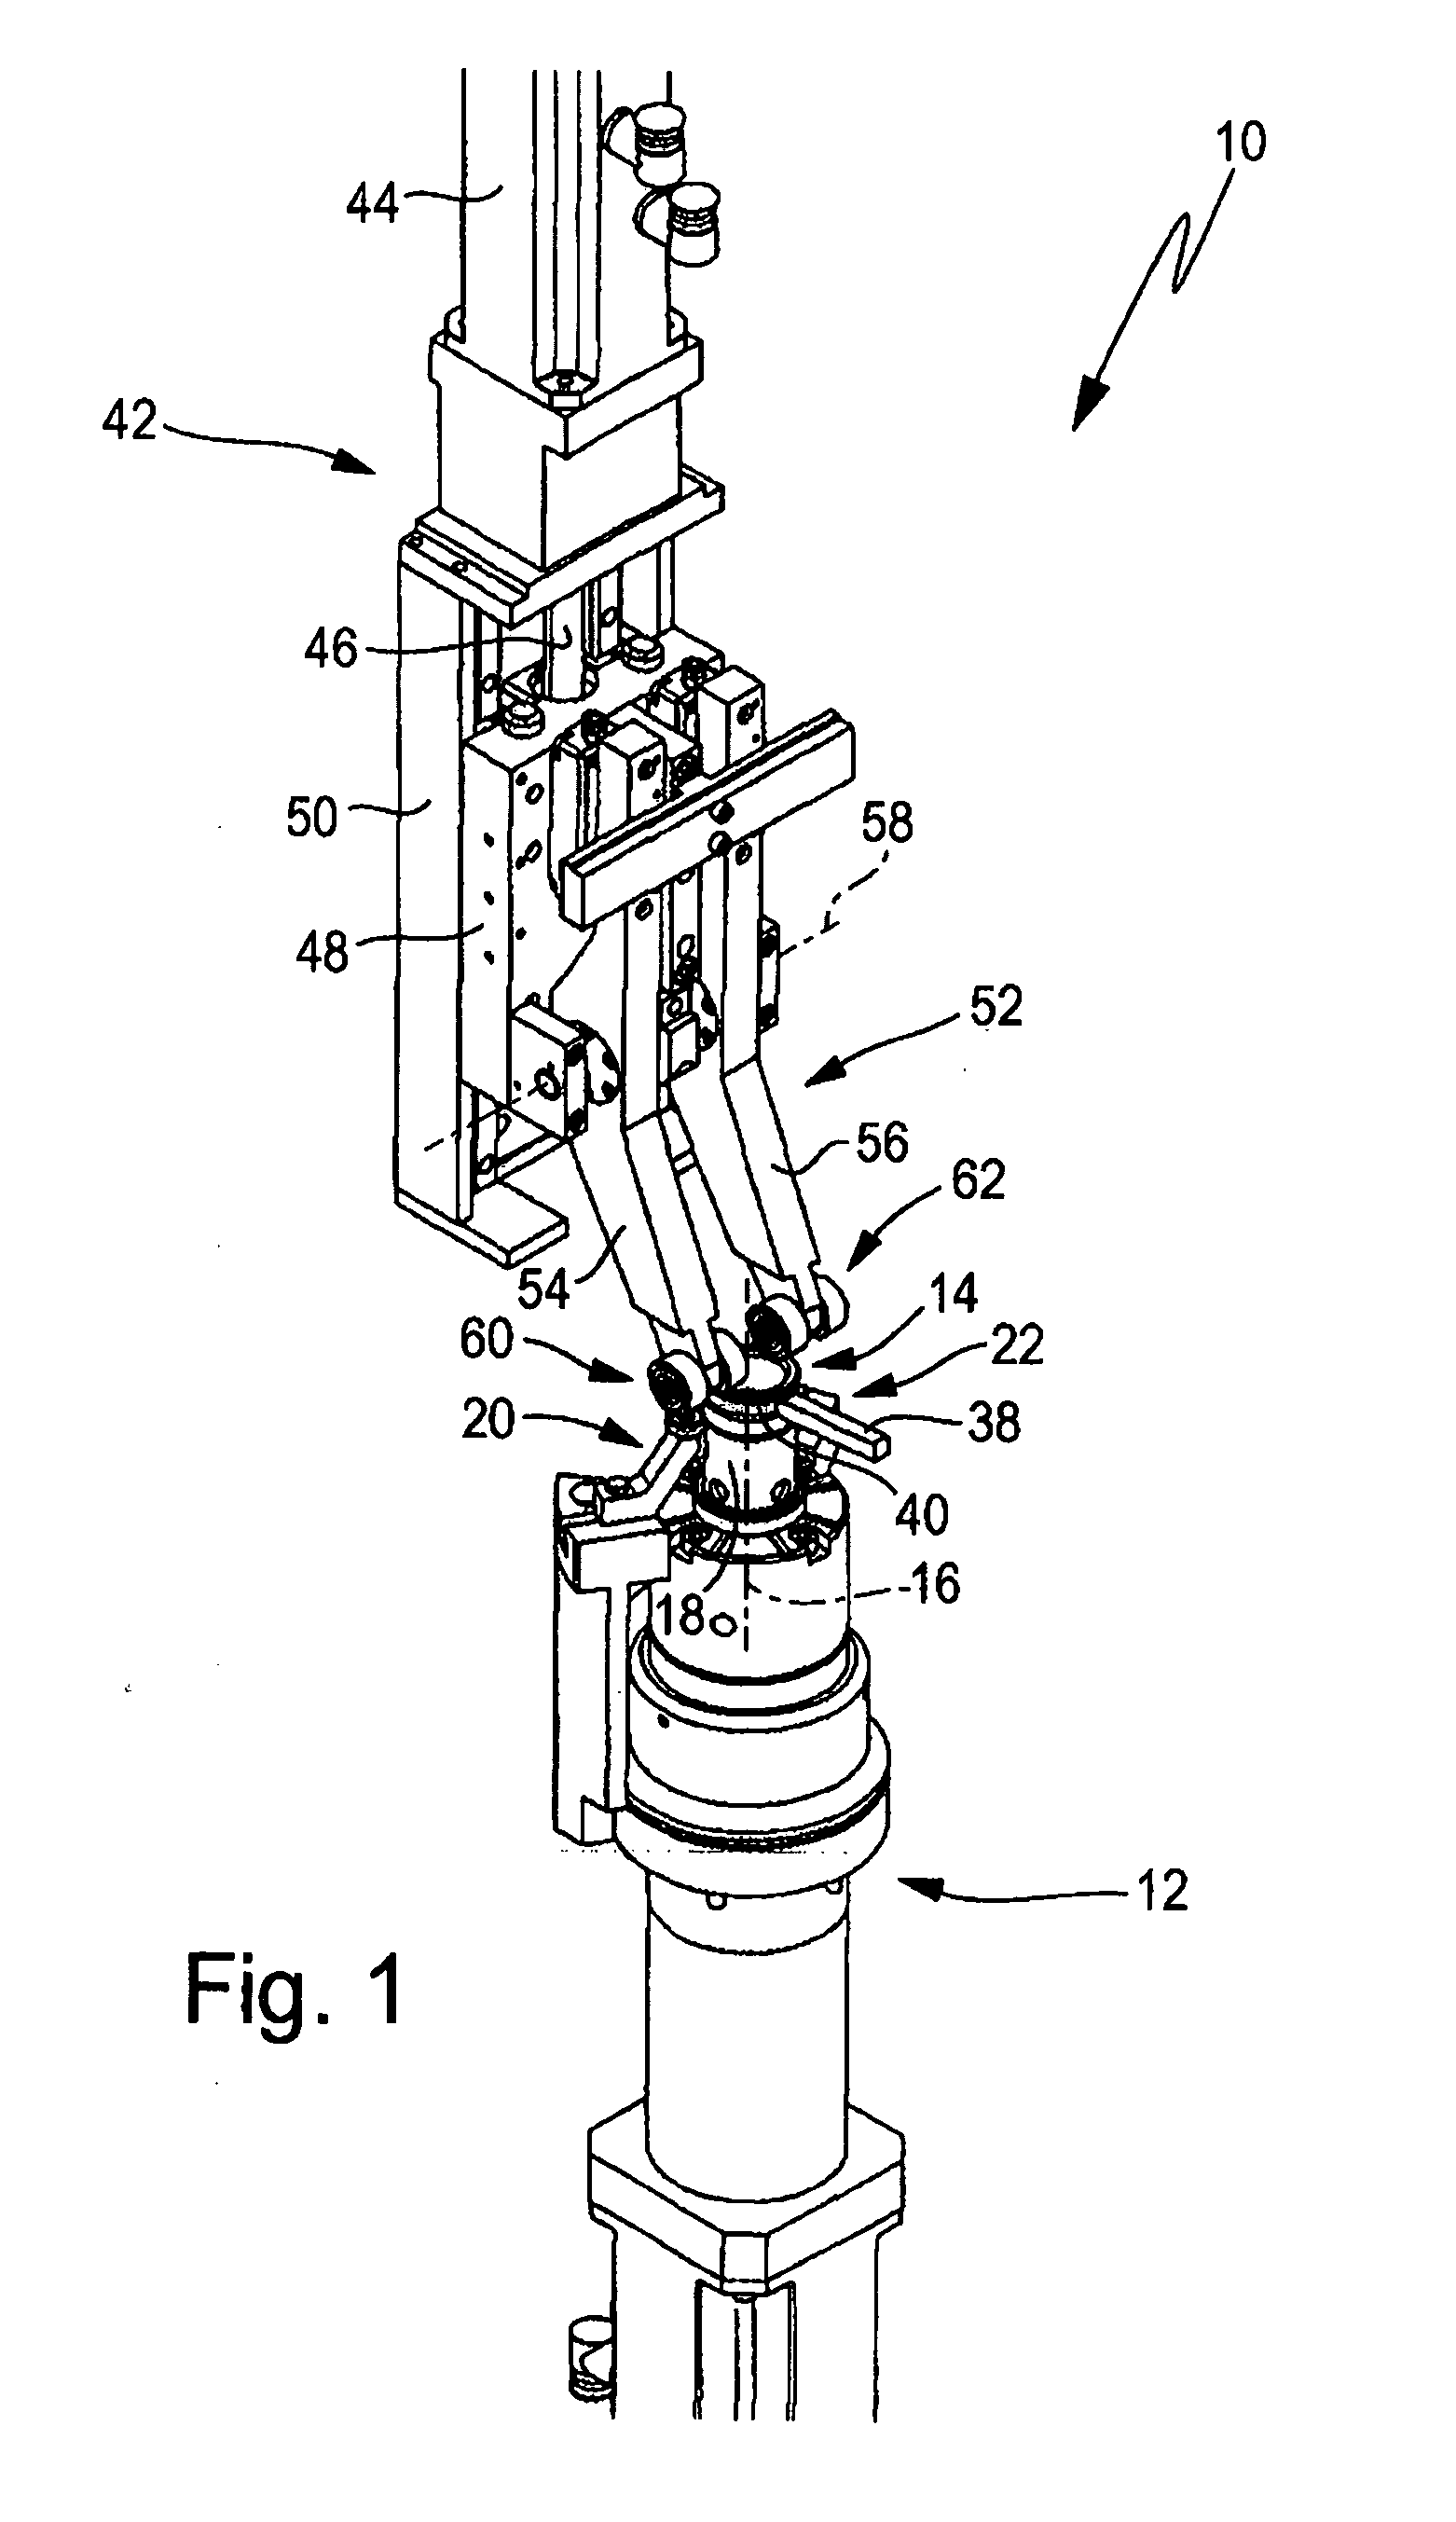 Device and method for fine or finest processing of a rotationally symmetric work piece surface